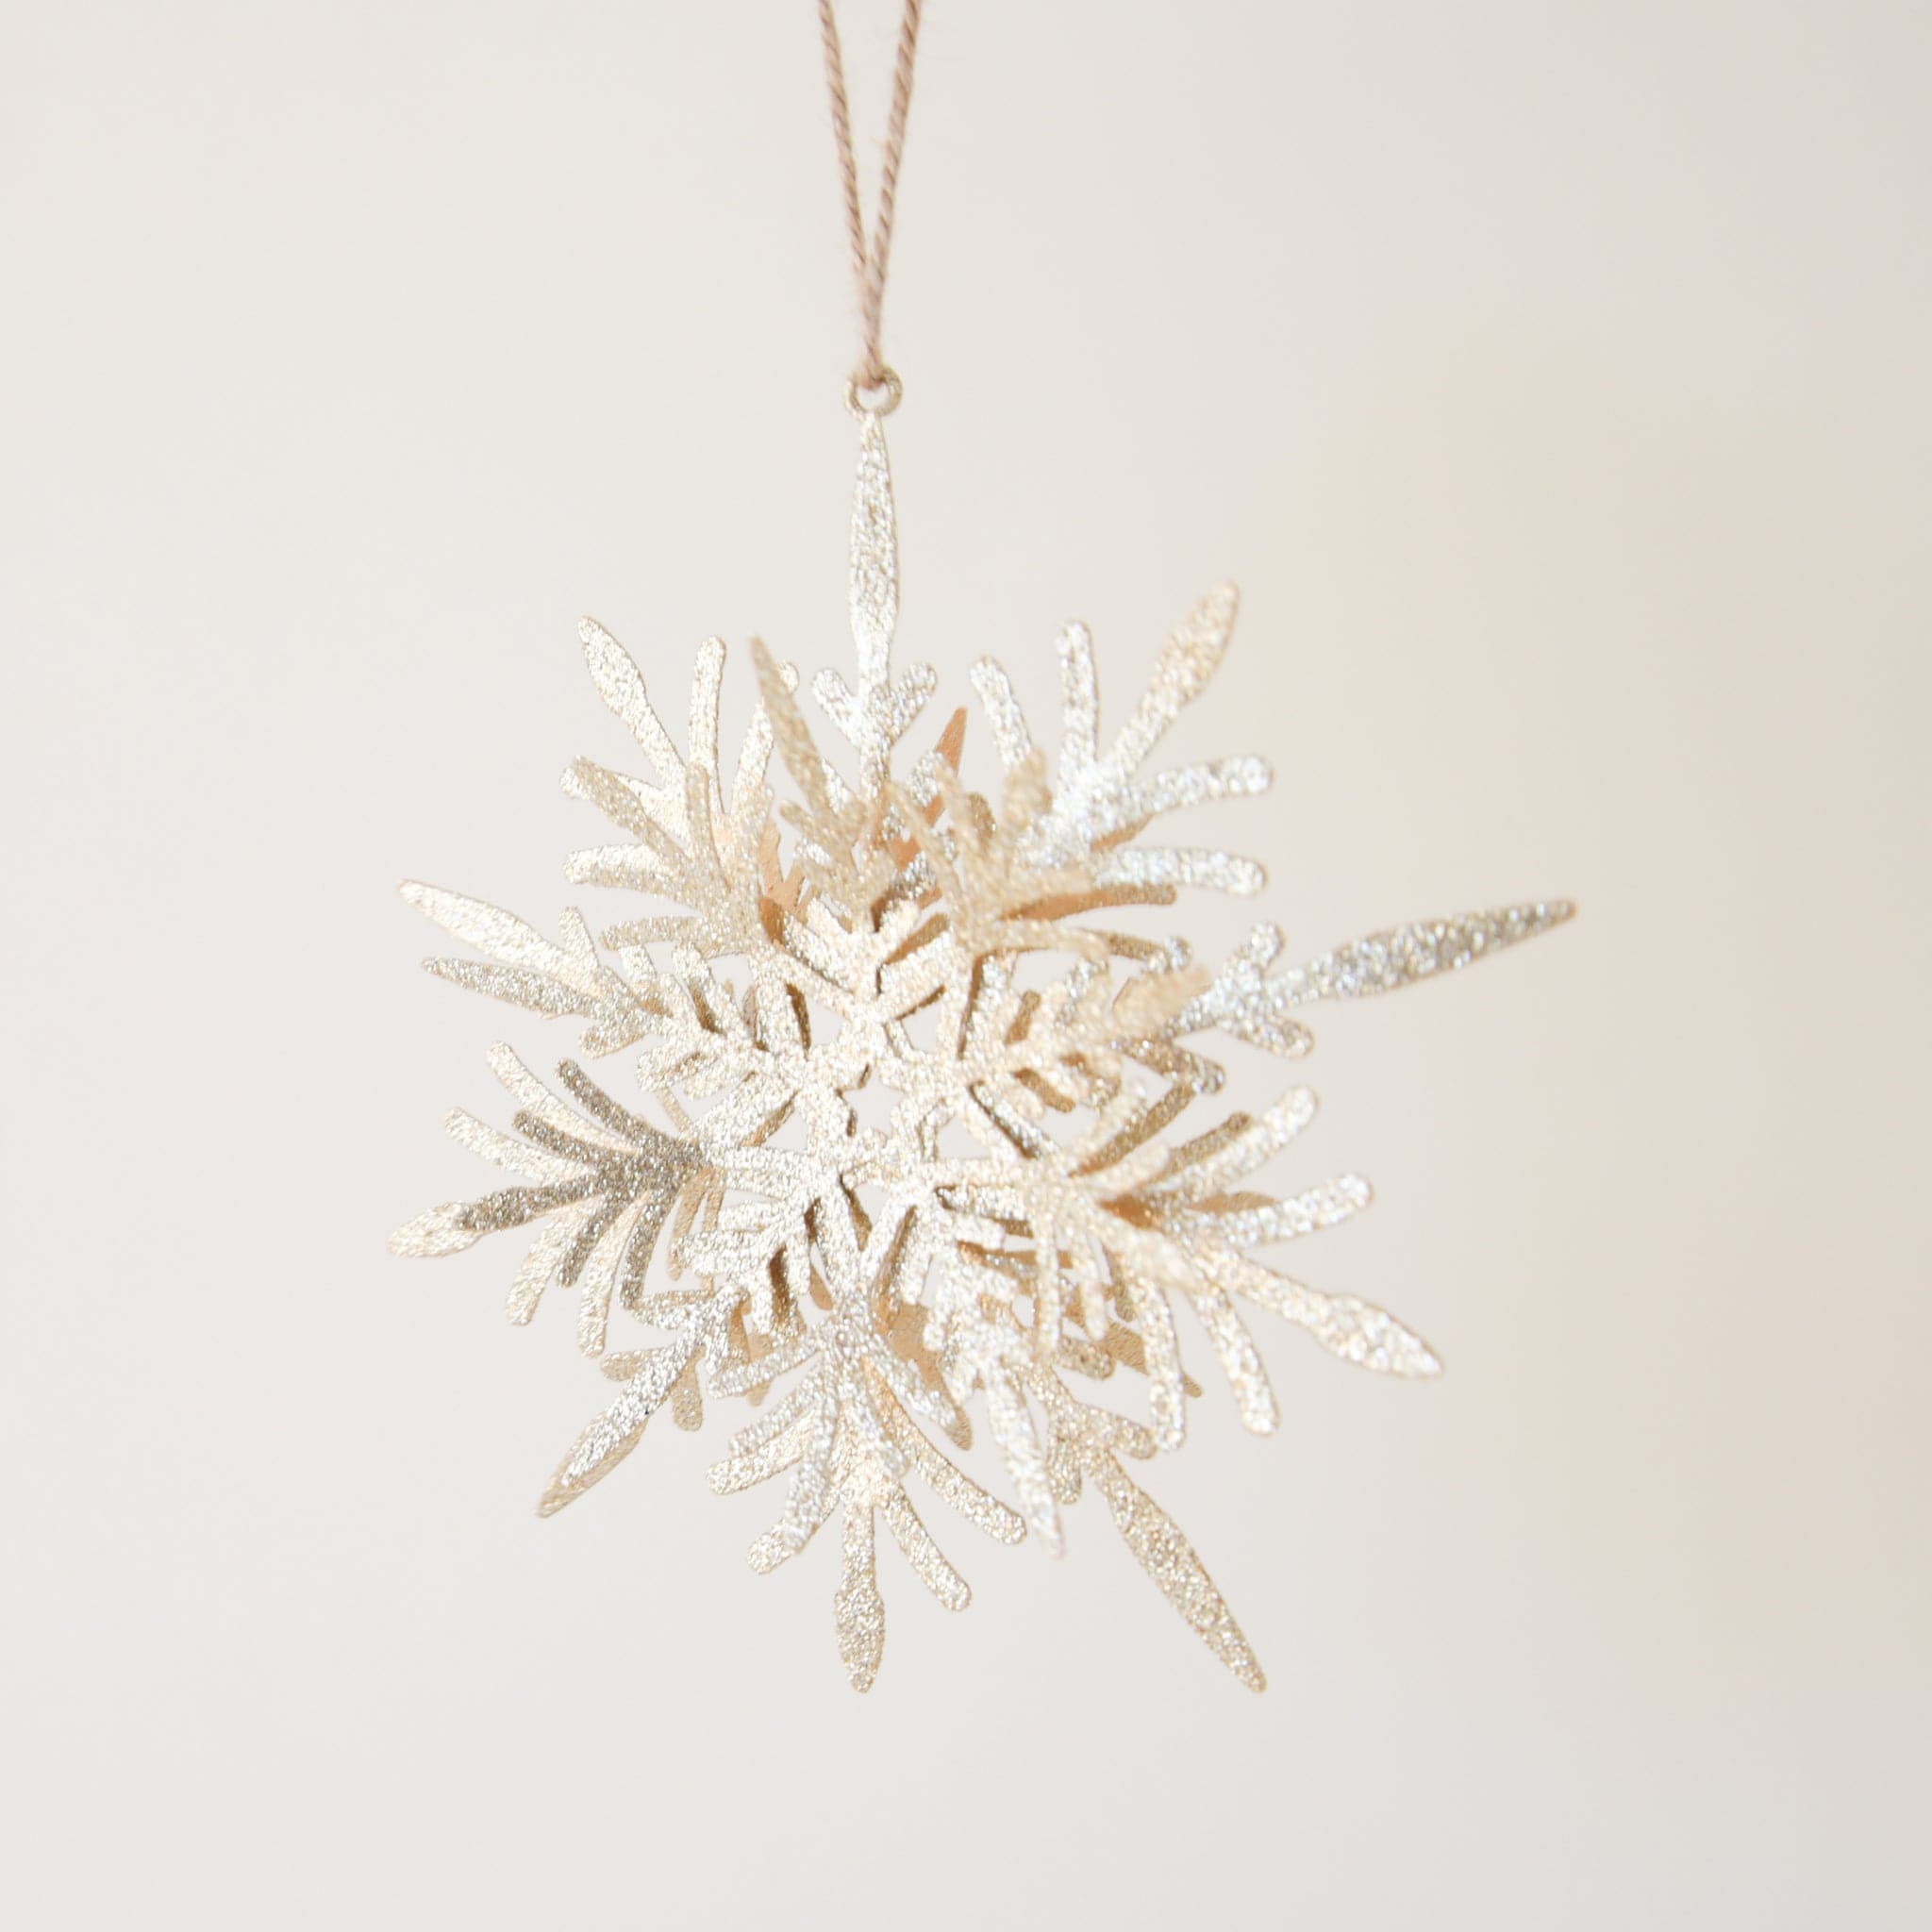 On a neutral background is a gold glitter snowflake ornament.